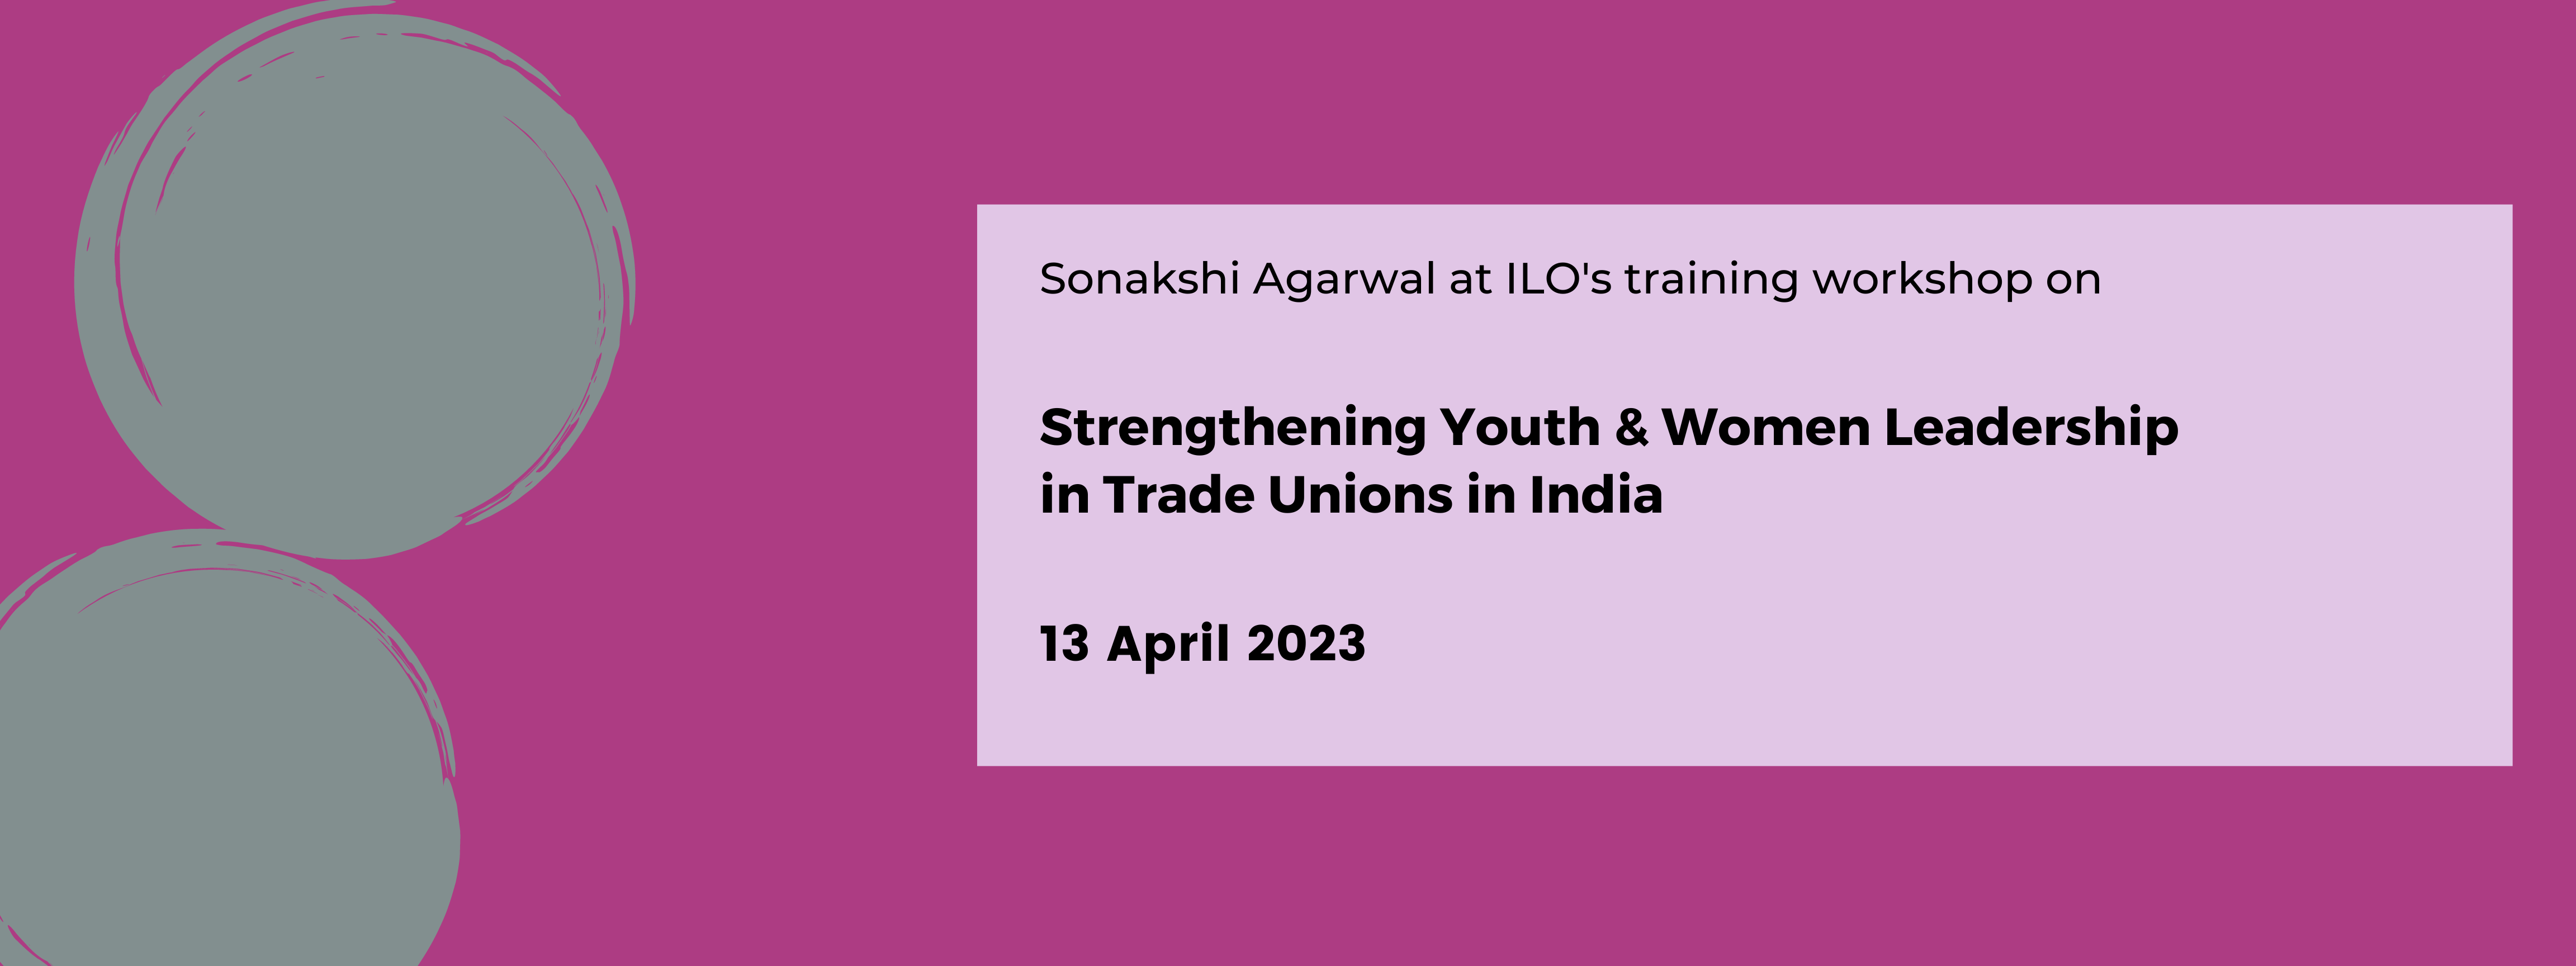 Strengthening Youth & Women Leadership in Trade Unions in India